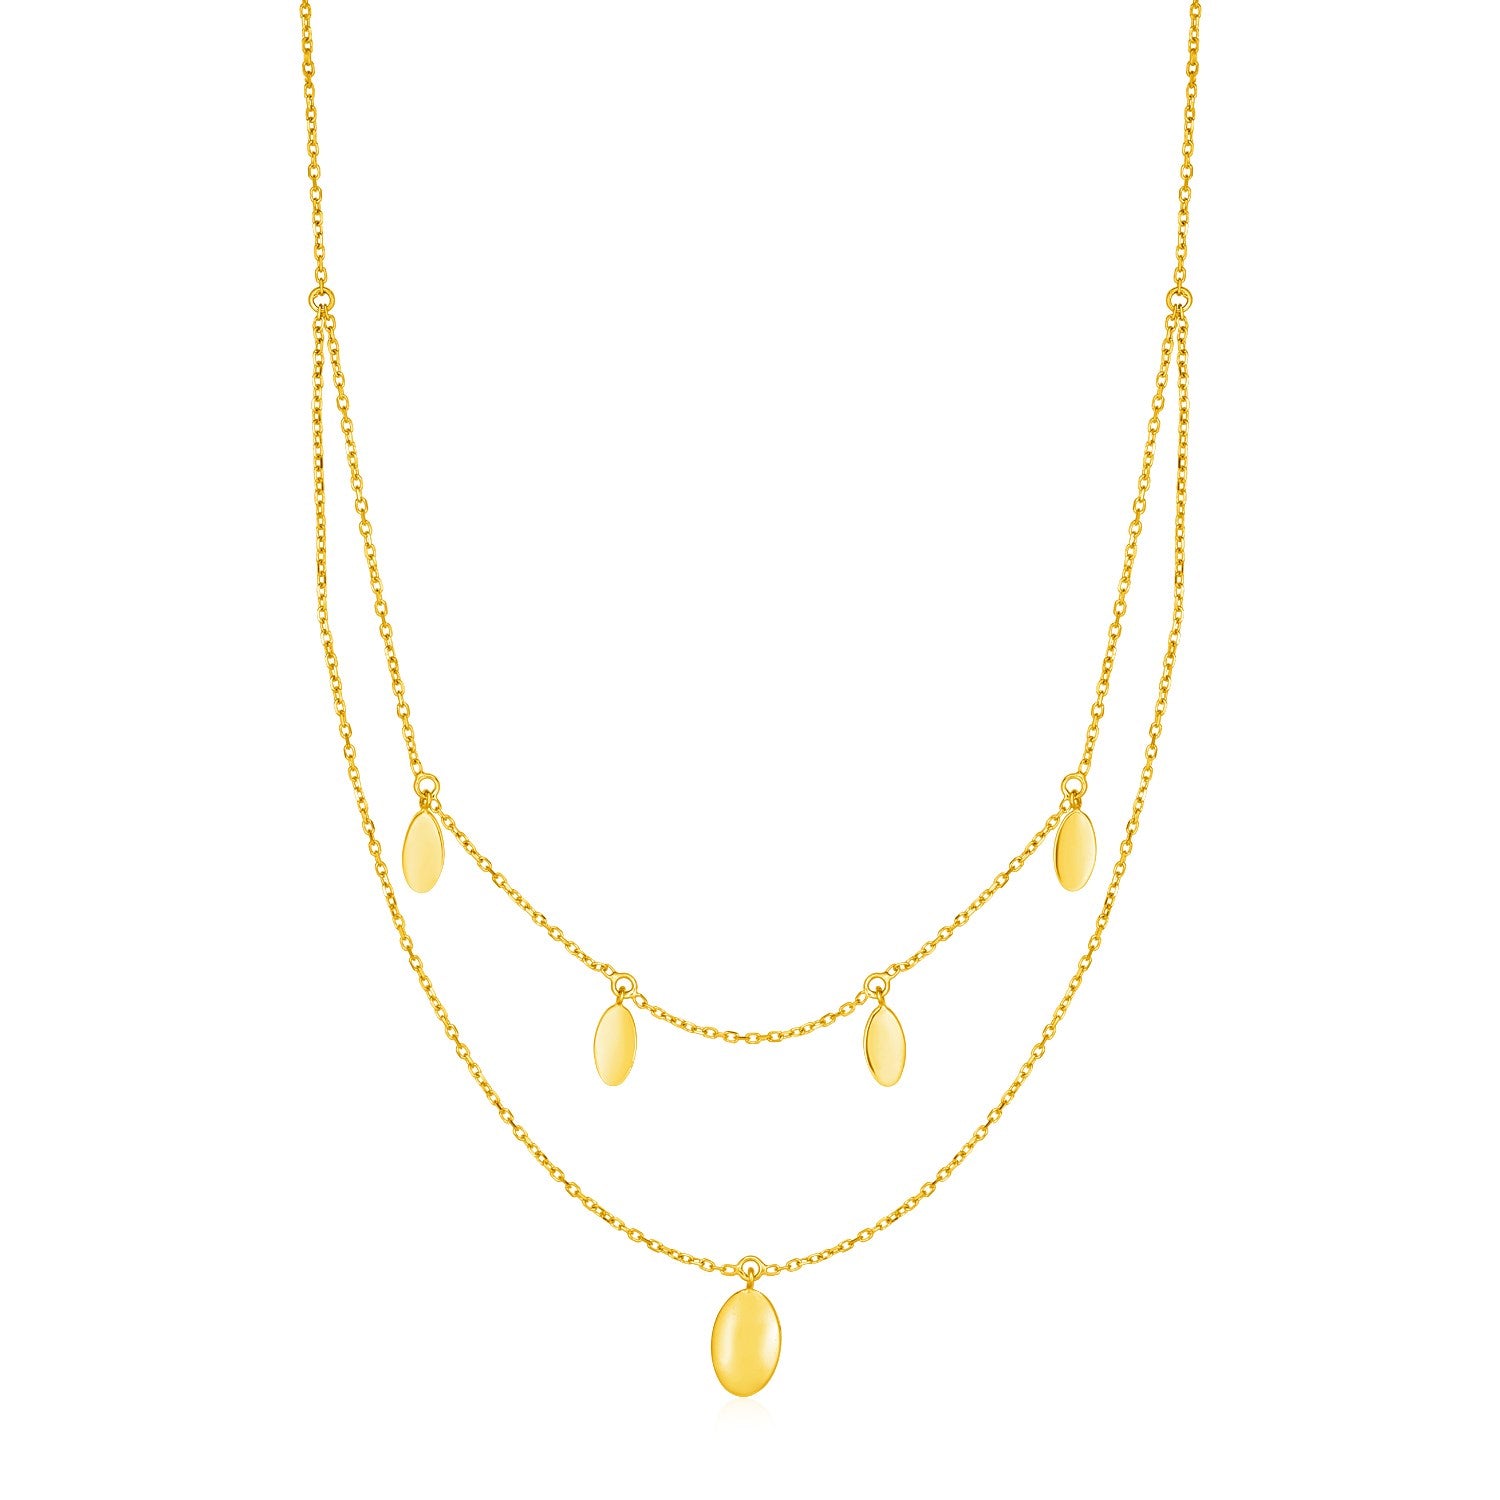 14k Yellow Gold Two Strand Necklace with Oval Drops